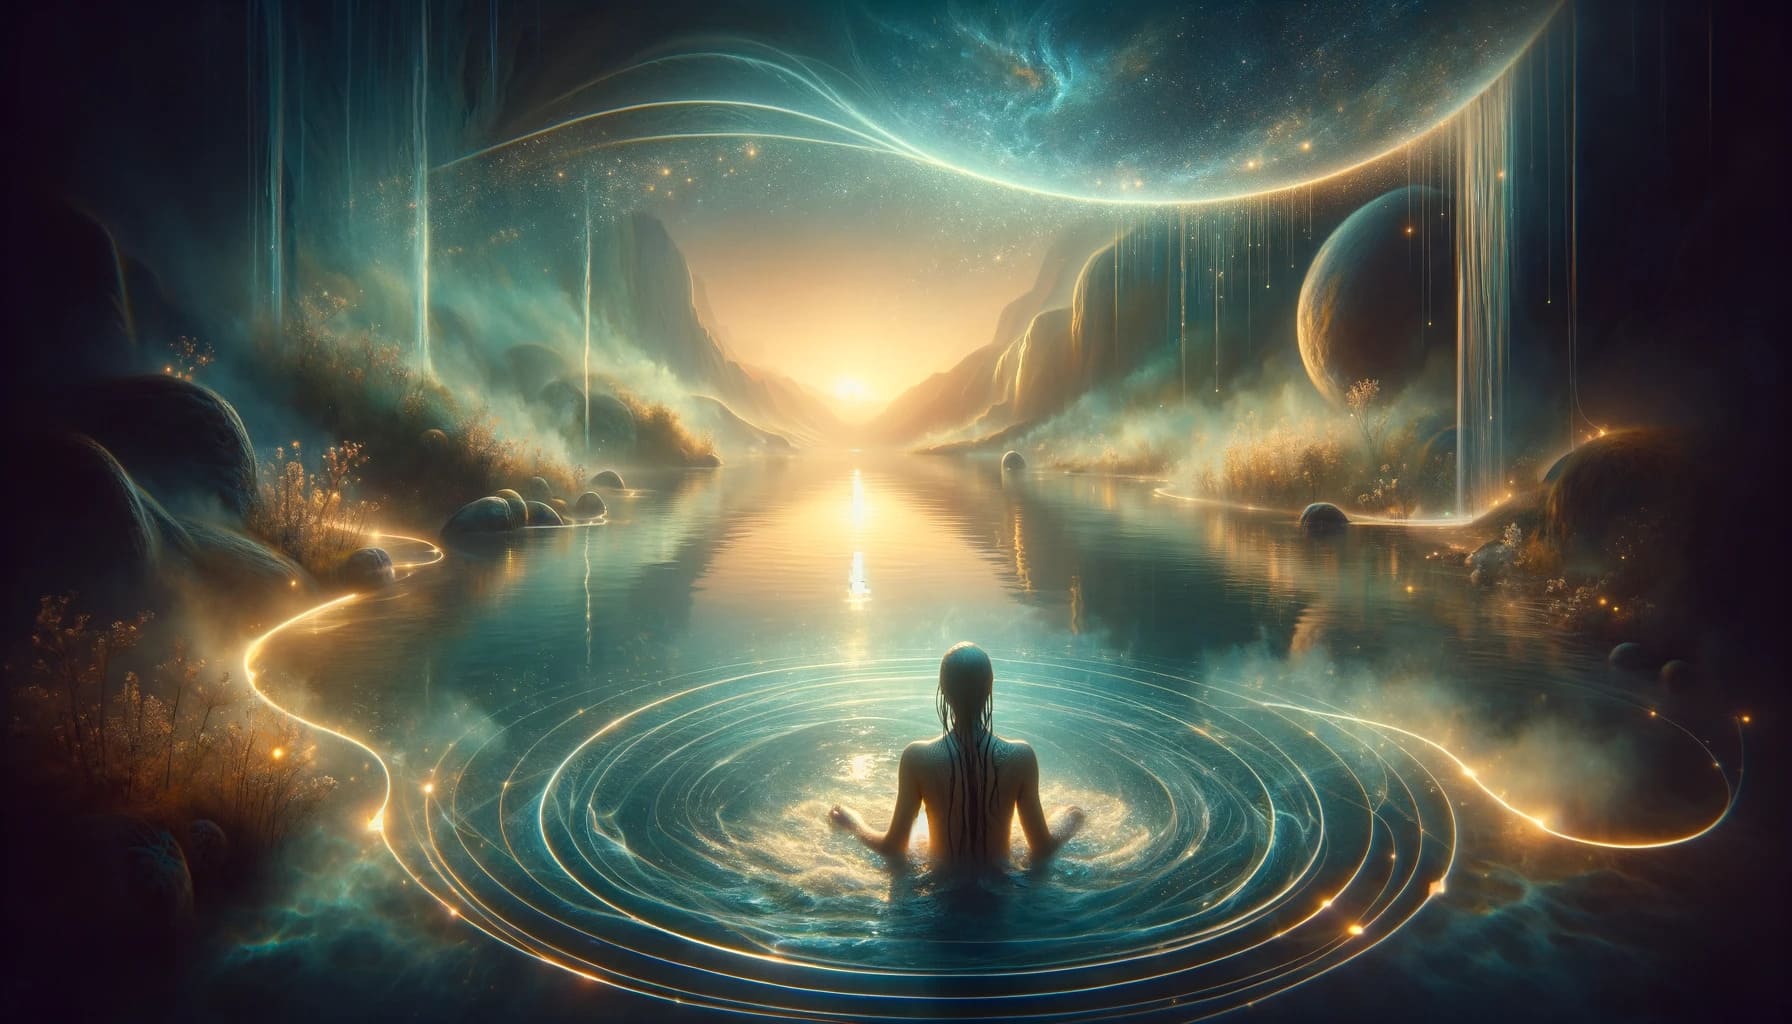 what is the spiritual meaning of bathing in a dream